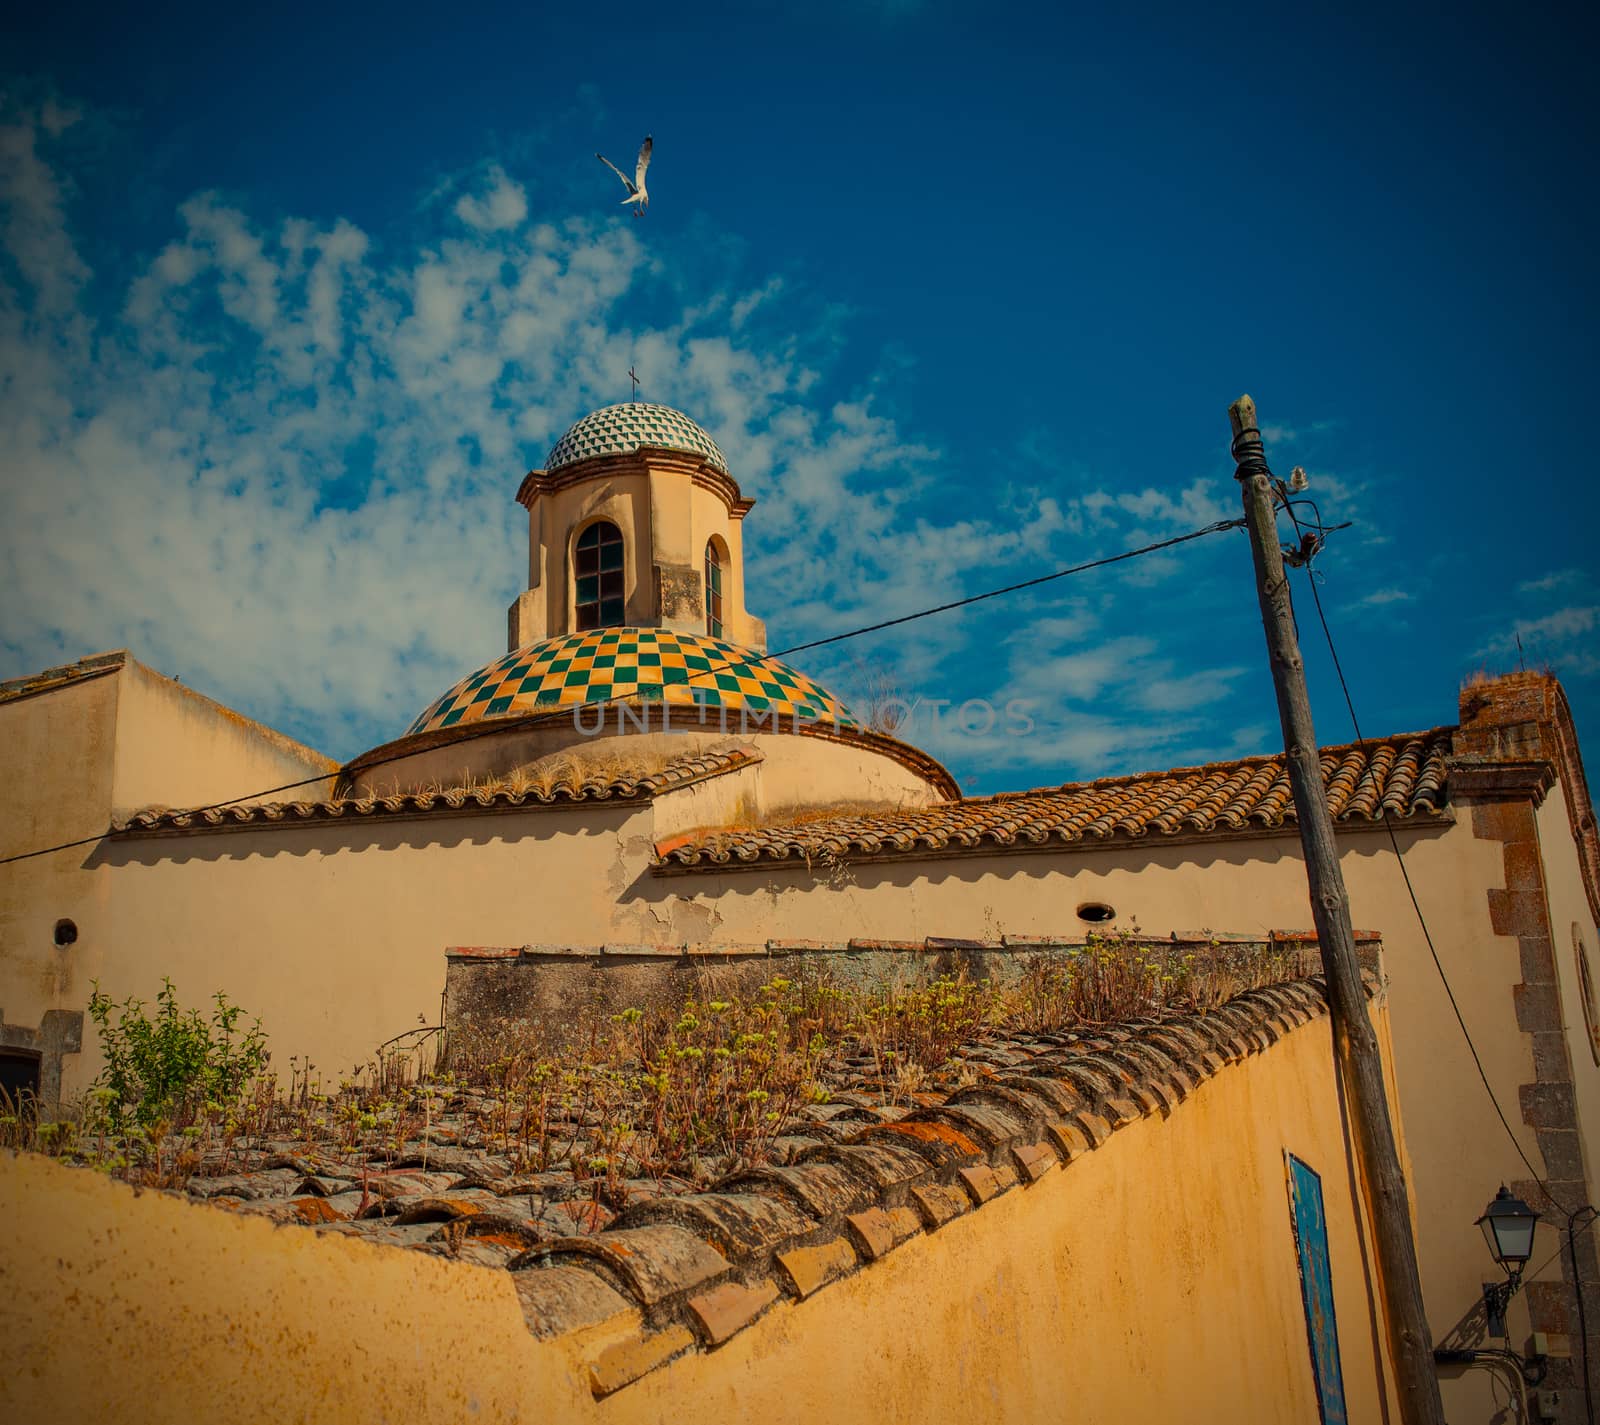 Tossa de Mar, Catalonia, Spain, 06.19.2013, landscape ancient town with a dome Catholic Church, instagram image style